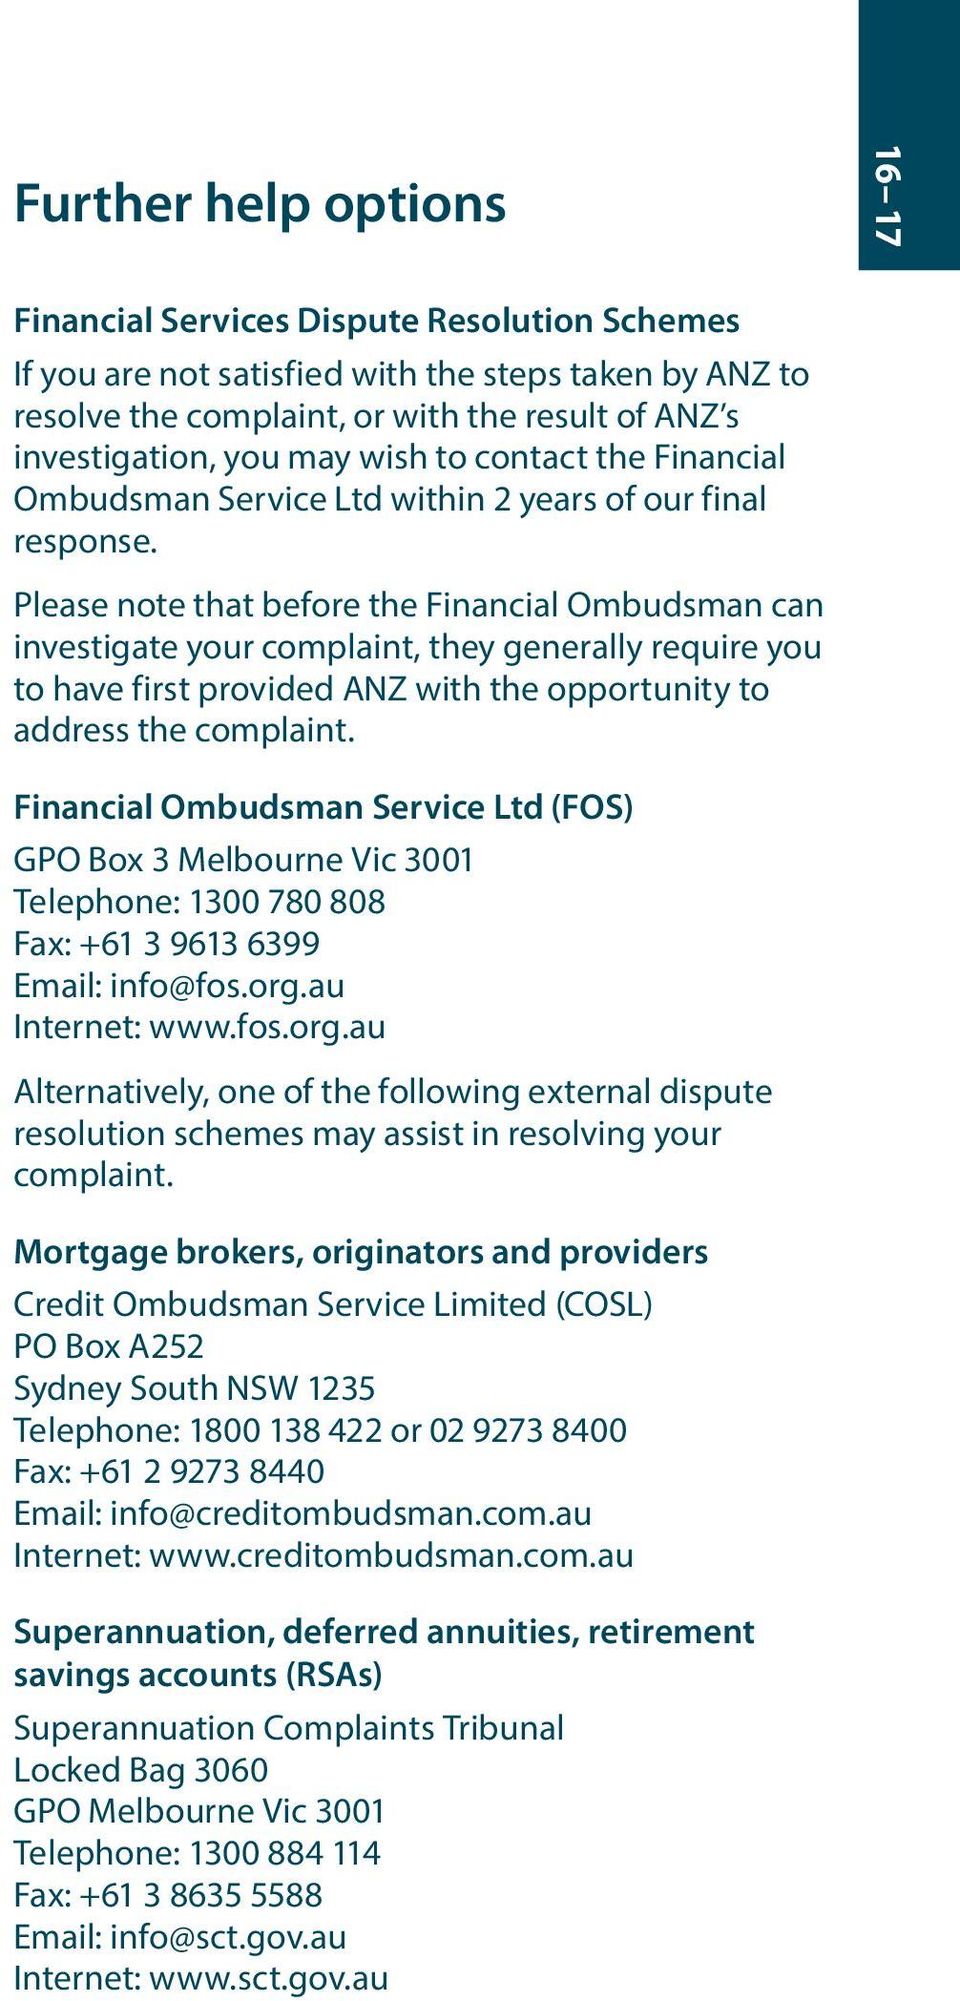 Please note that before the Financial Ombudsman can investigate your complaint, they generally require you to have first provided ANZ with the opportunity to address the complaint.